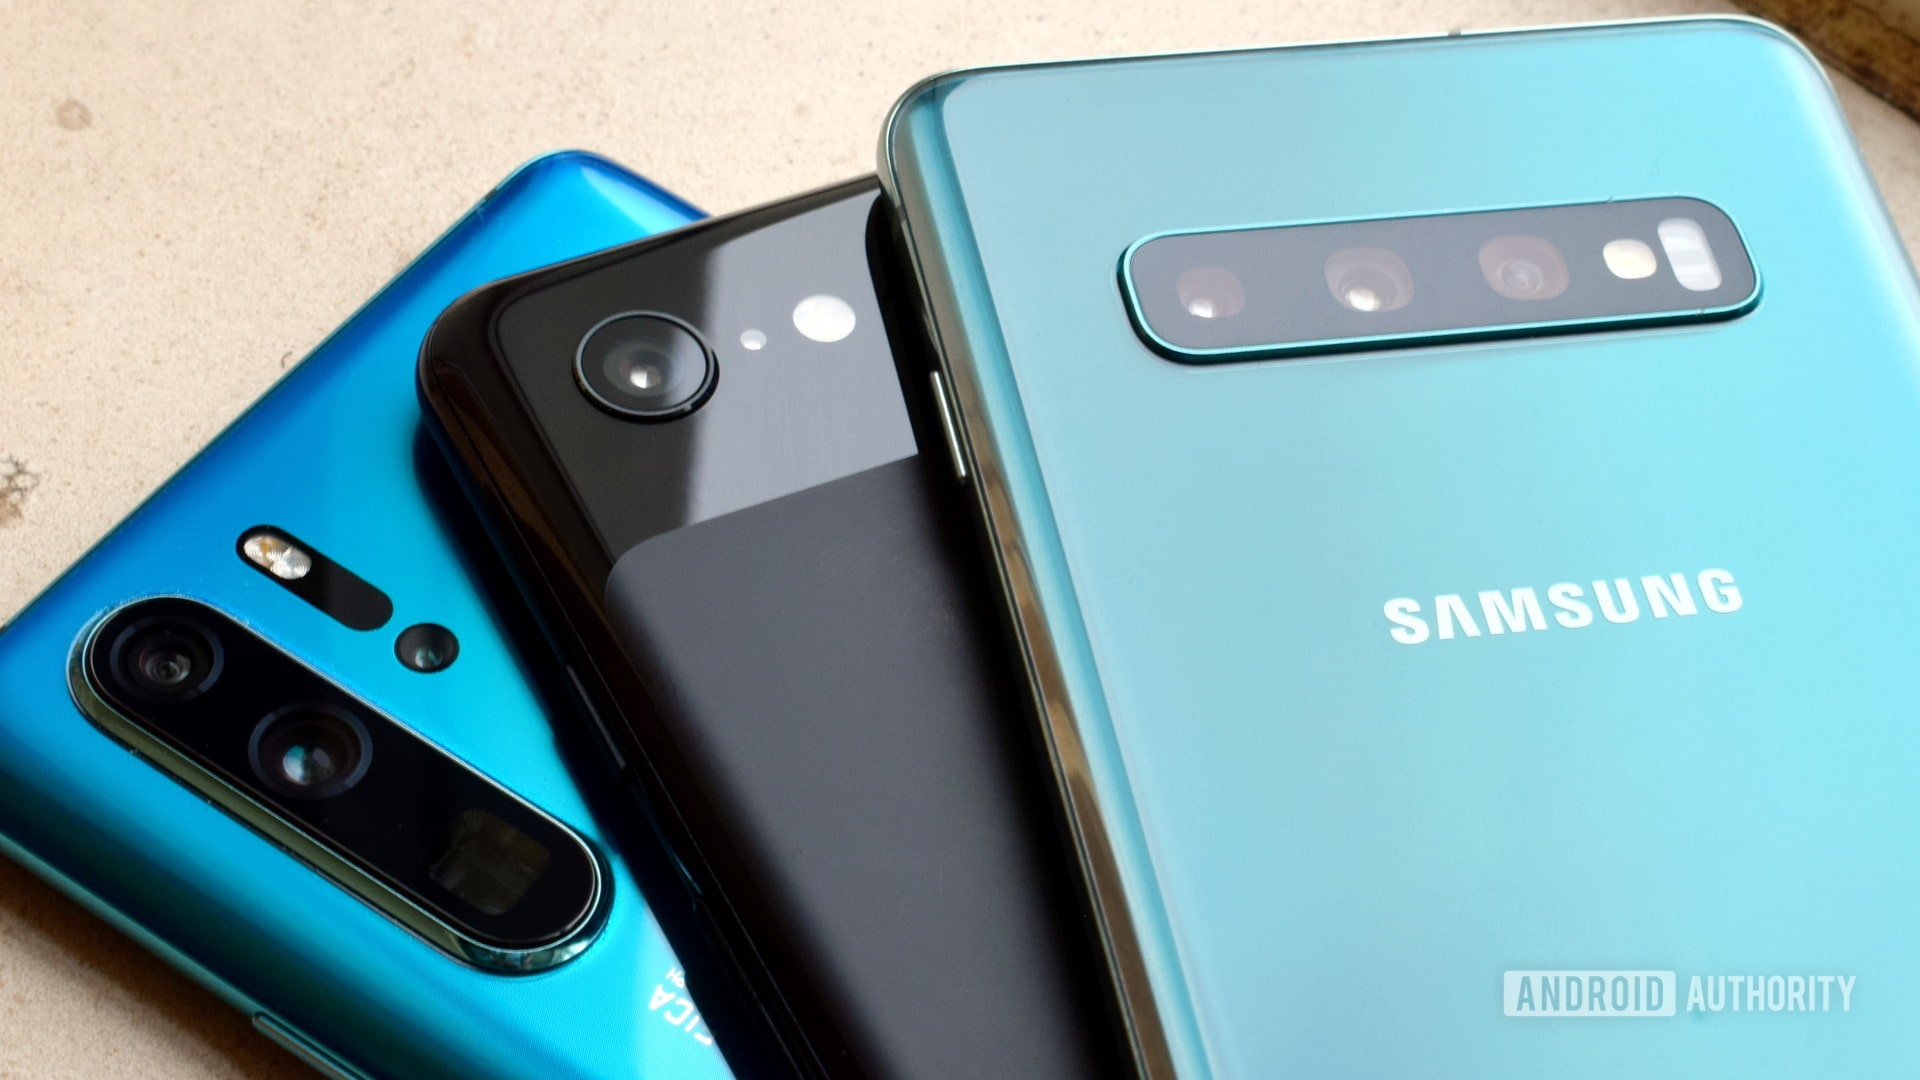 Backs of the HUAWEI P30 Pro, Google Pixel 3, and Samsung Galaxy S10